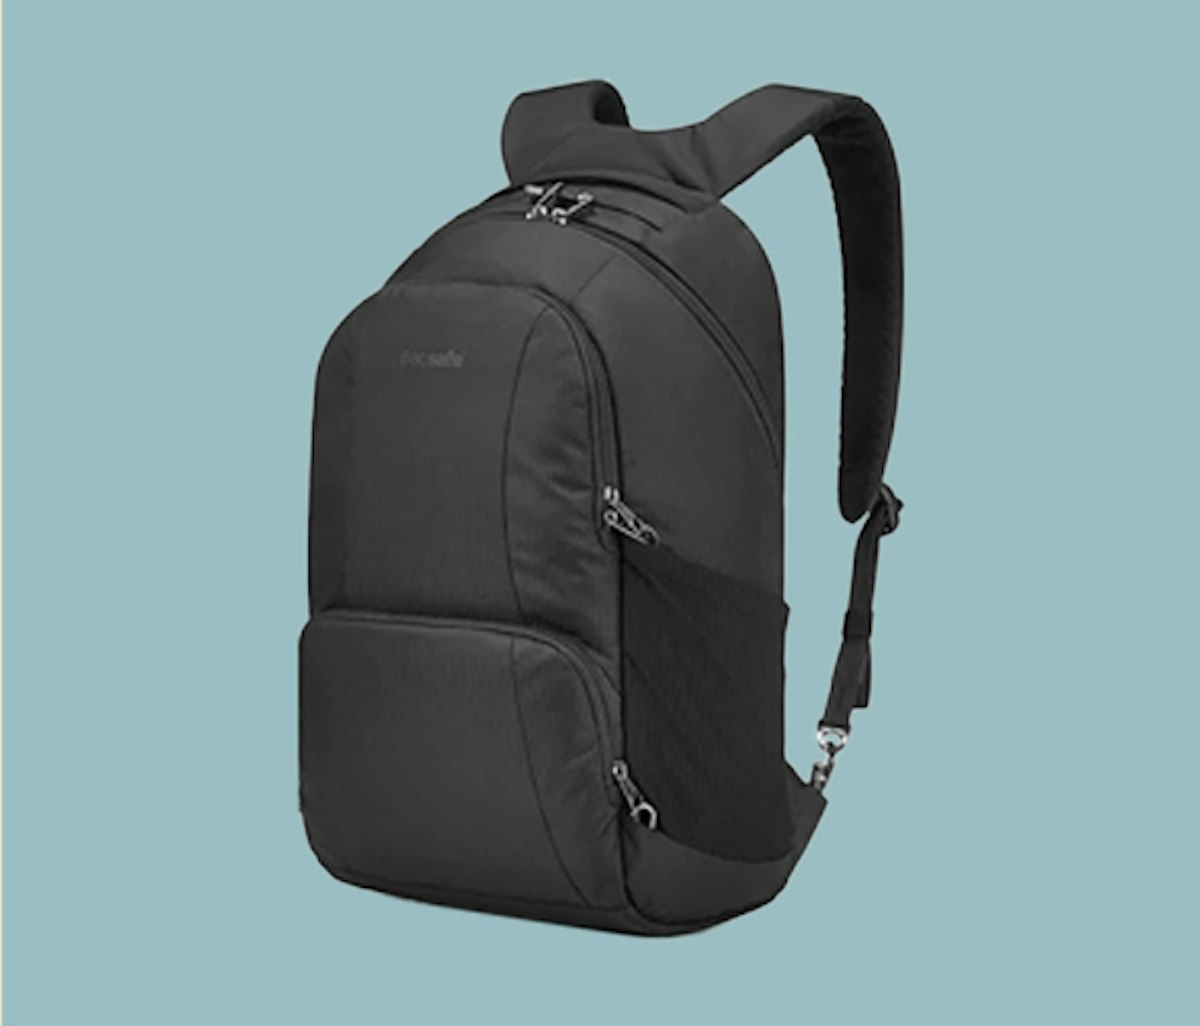 A black backpack on a blue background.